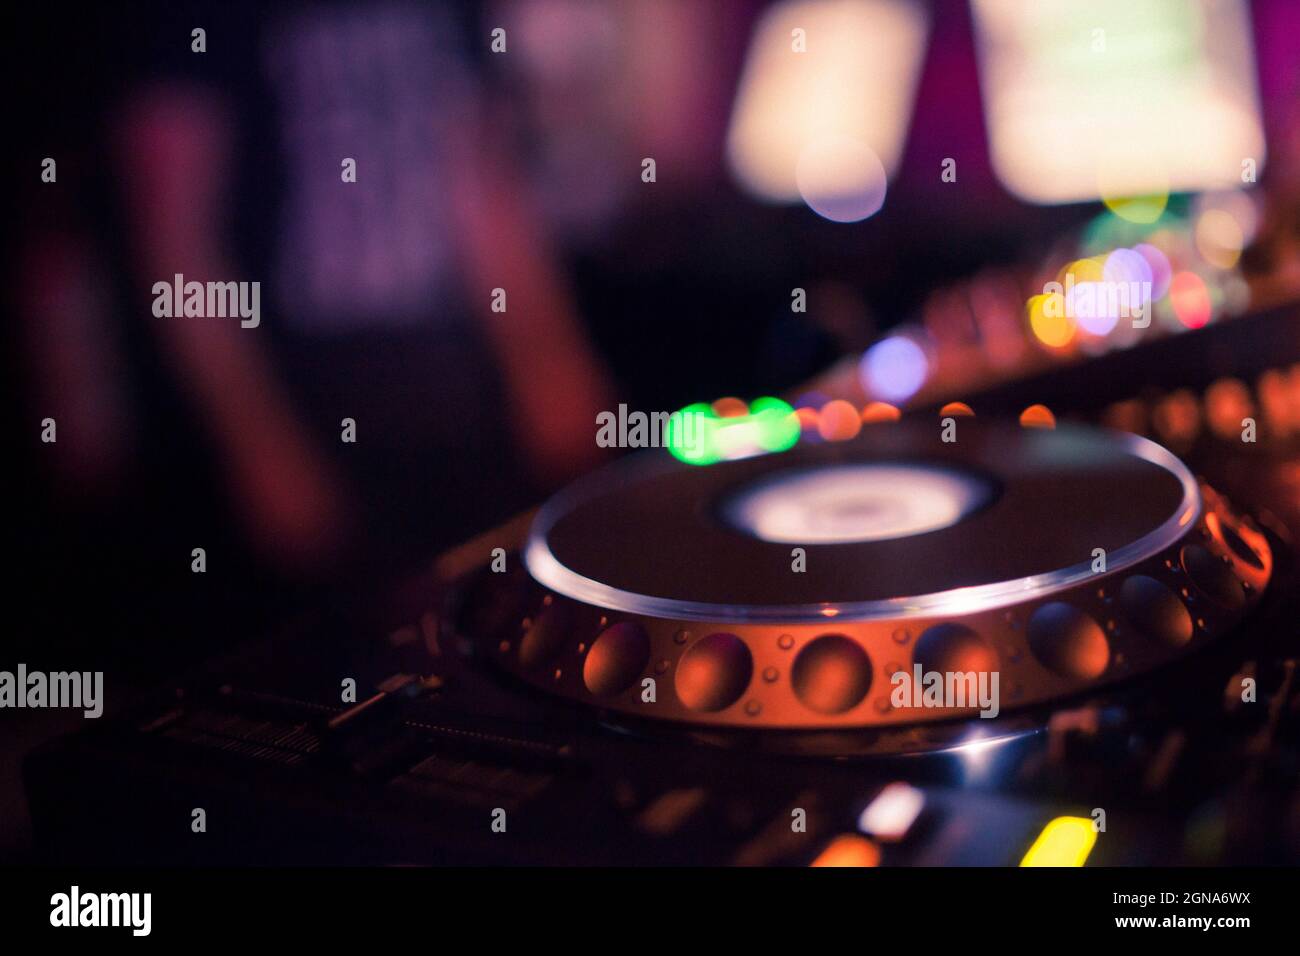 Close up of DJ console during party concert, music, electronic music, rave Stock Photo